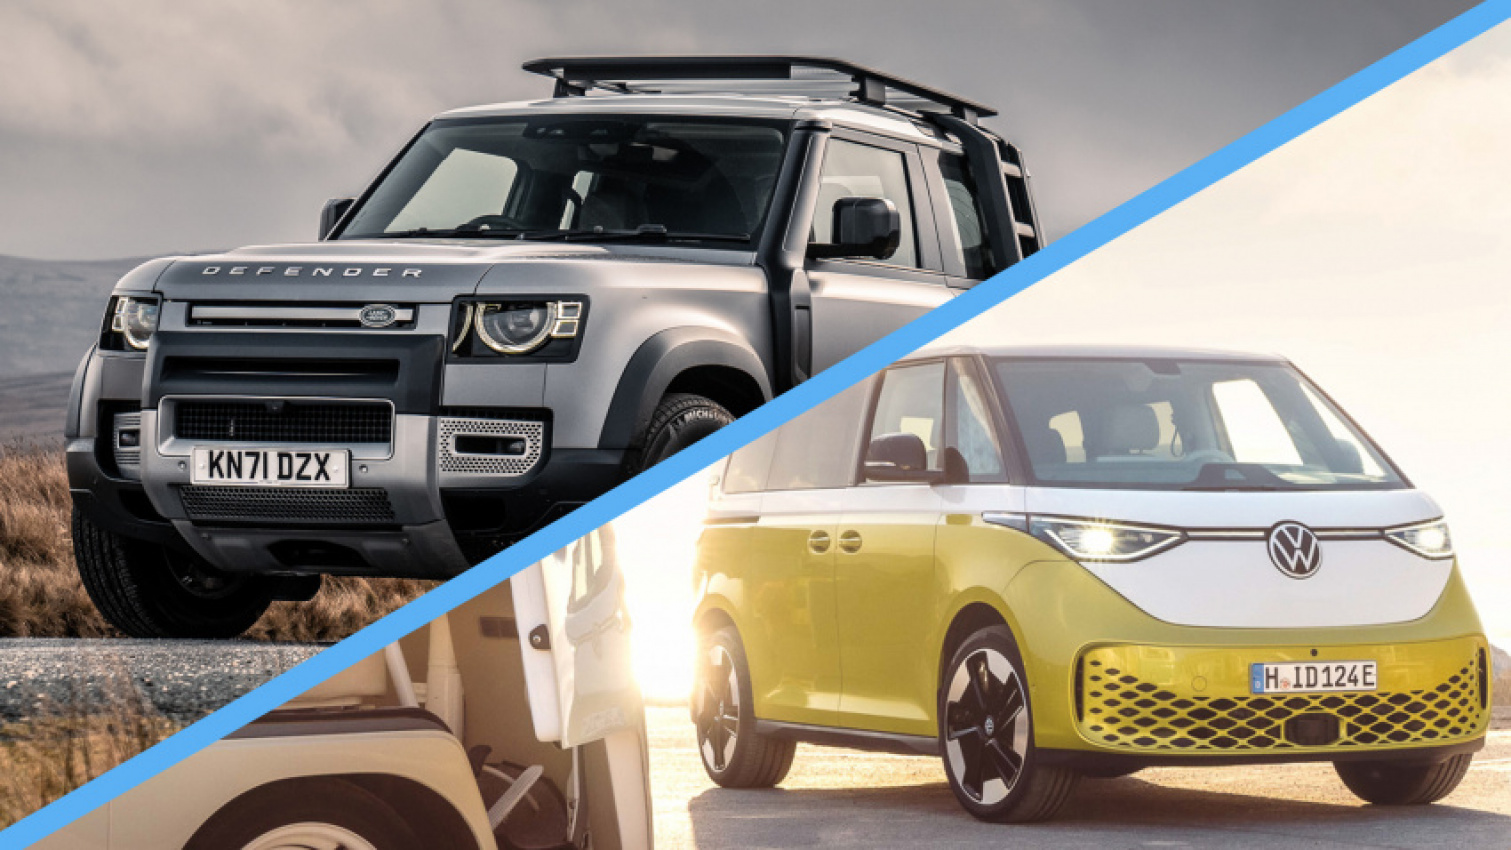 autos, cars, land rover, retro, land rover defender, land rover defender vs vw id buzz: who's done reinvention better?